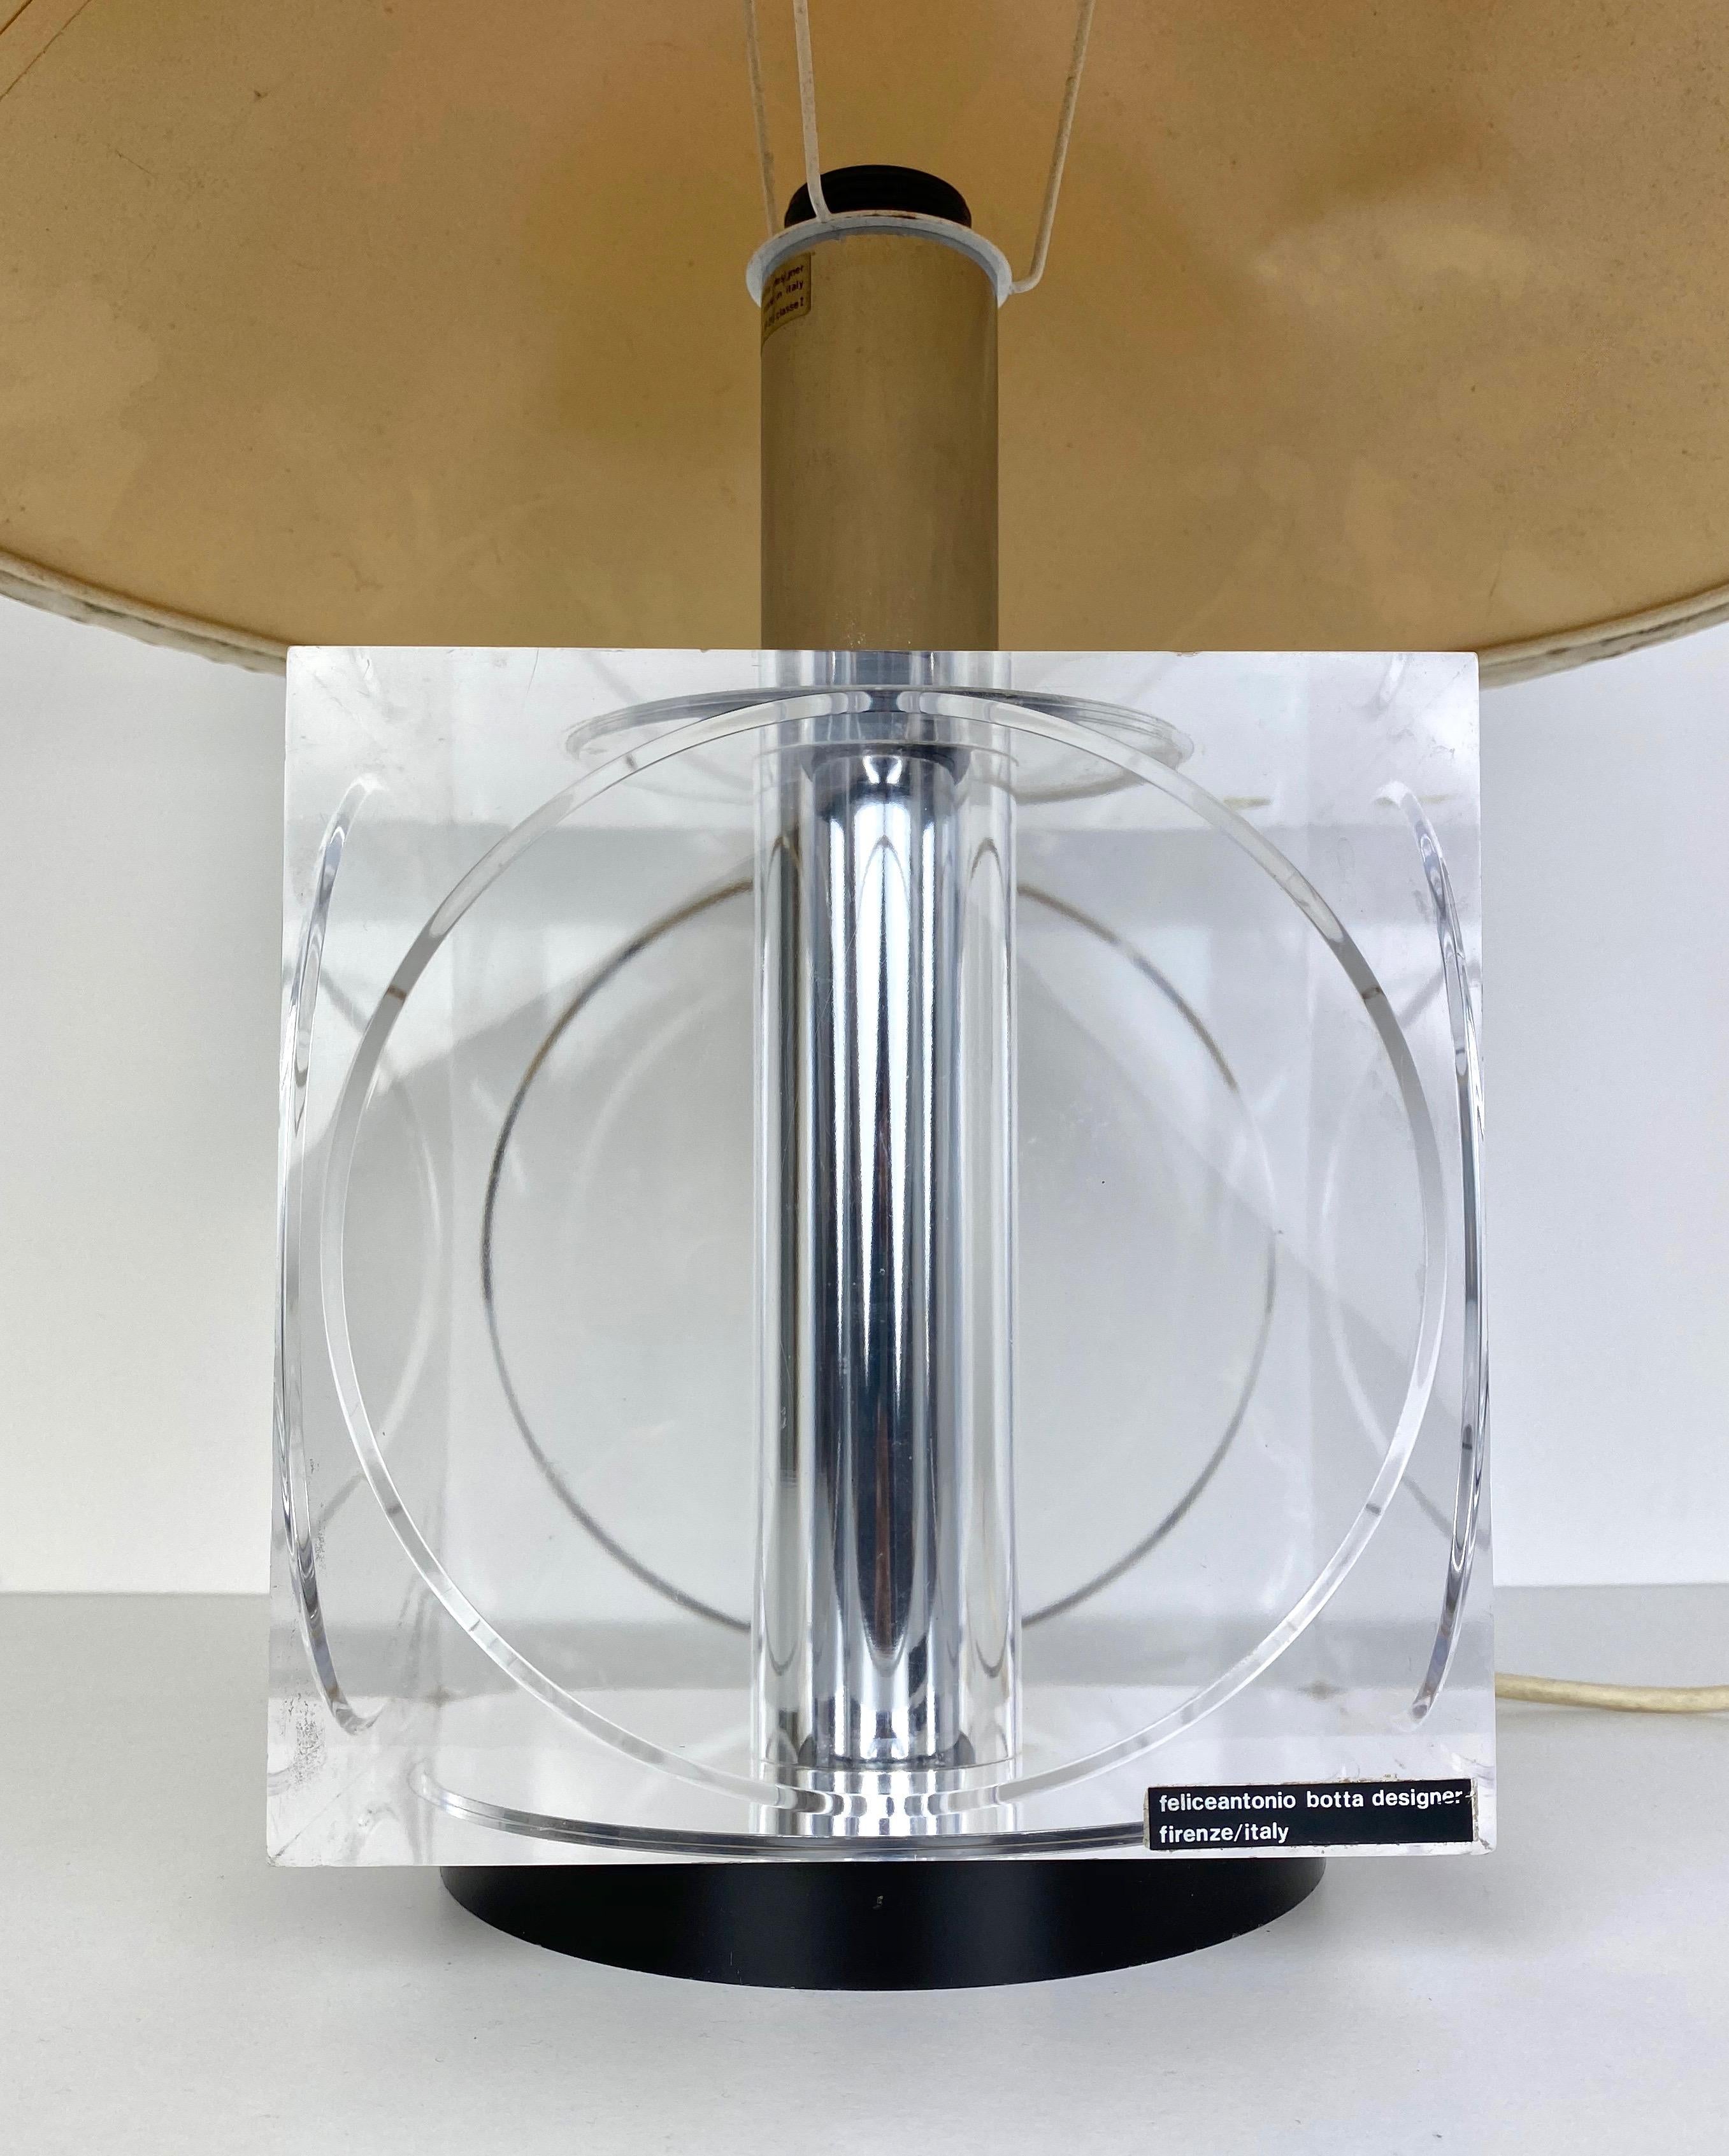 Metal Table Lamp Signed Felice Antonio Botta in Lucite, Firenze, Italy, 1970s For Sale